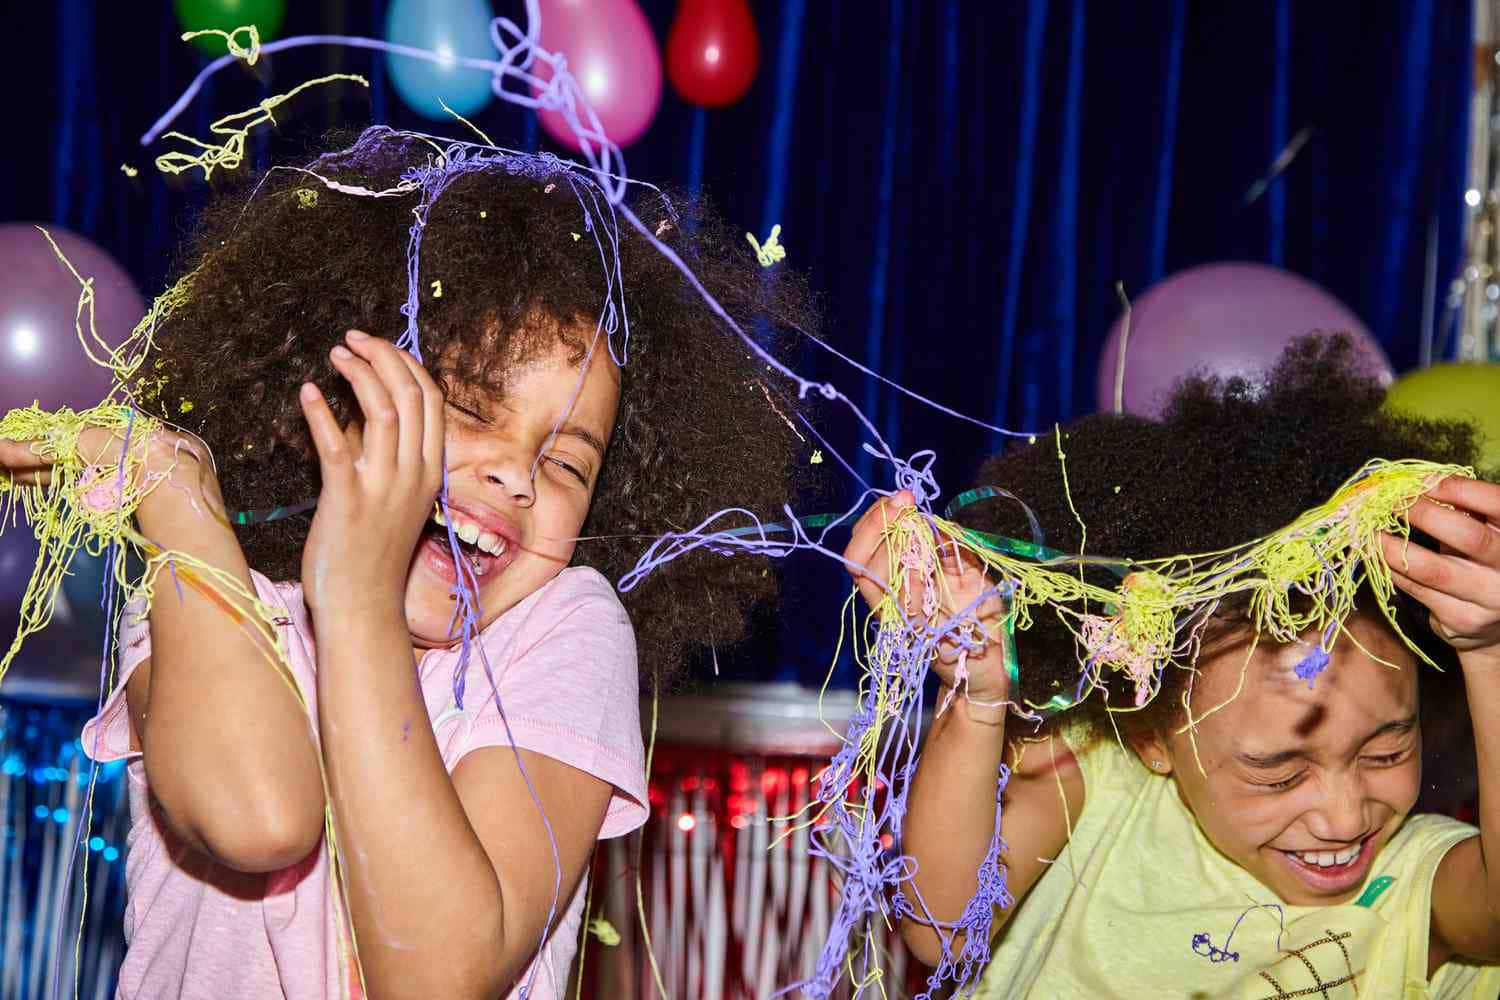 Silly Kids Party Pictures